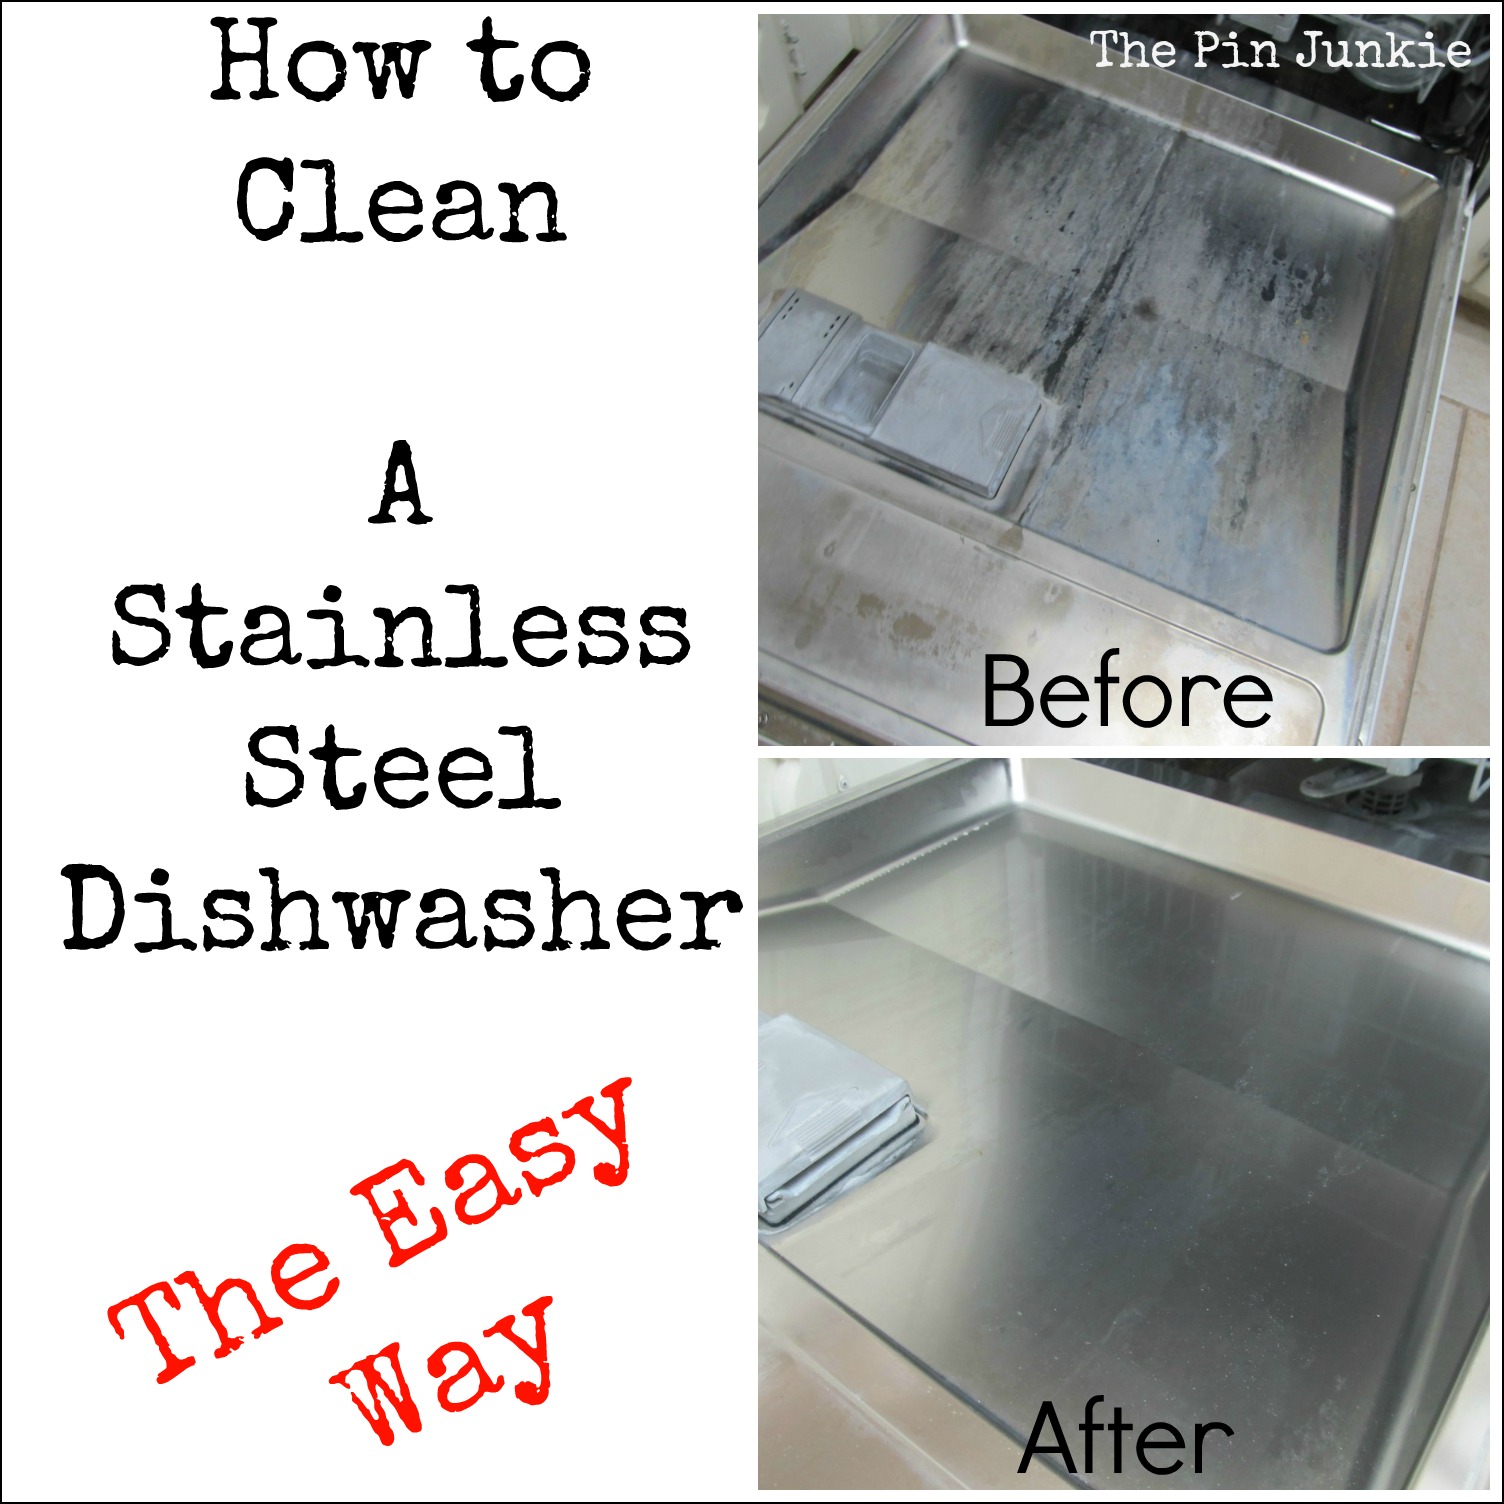 Can You Wash Stainless Steel In Dishwasher